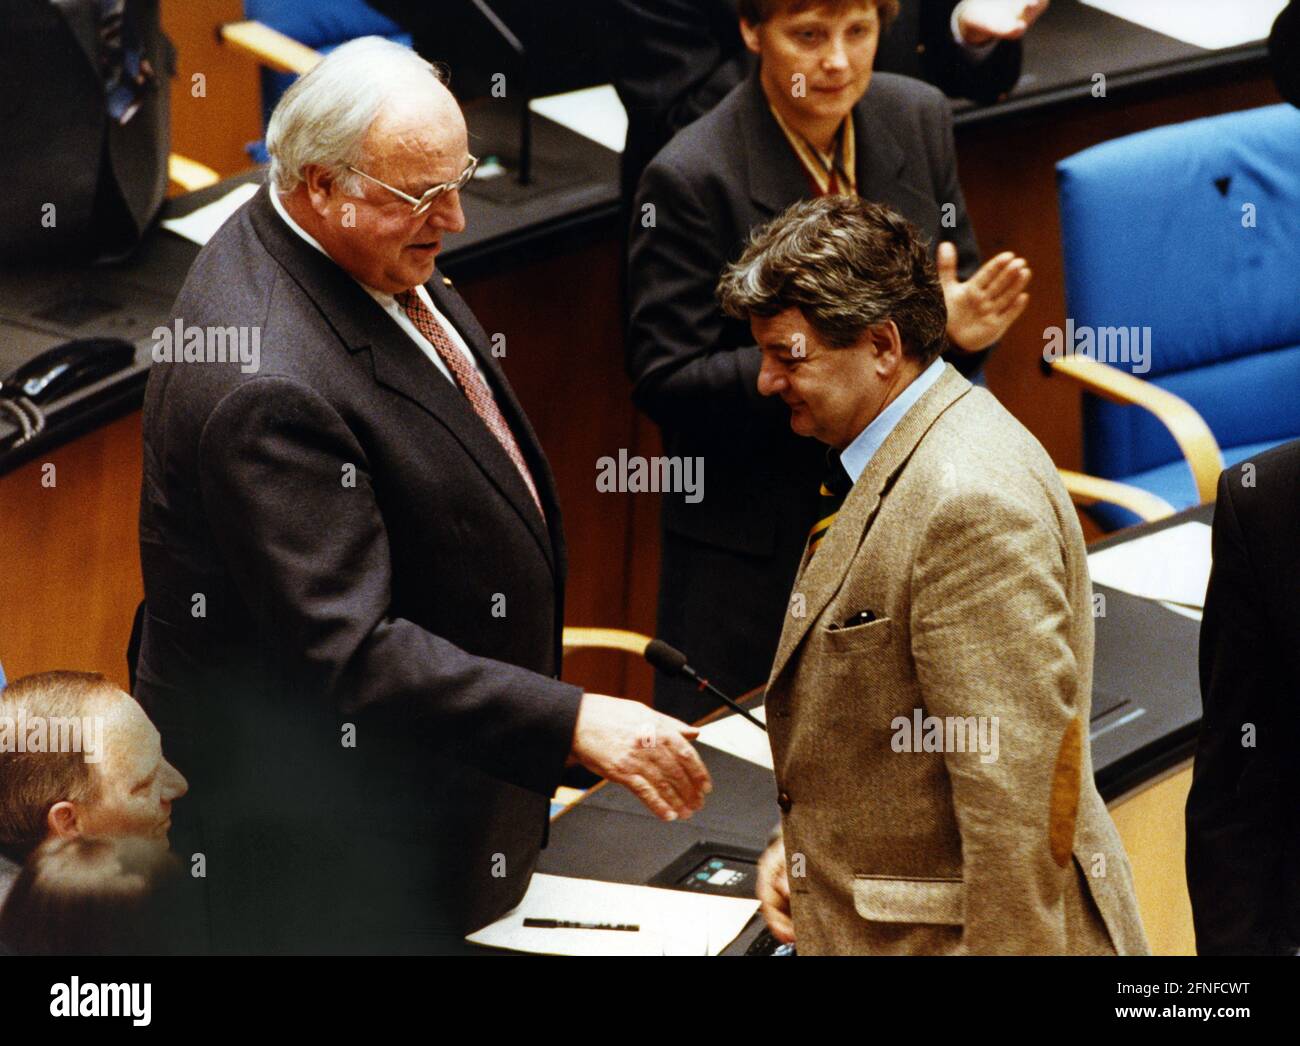 Joschka Fischer (right) congratulates Helmut Kohl (left) on his renewed chancellorship in the Bundestag. To the left of Kohl, Wolfgang Schäuble, chairman of the CDU/CSU parliamentary group in the Bundestag, to the right Angela Merkel. [automated translation] Stock Photo